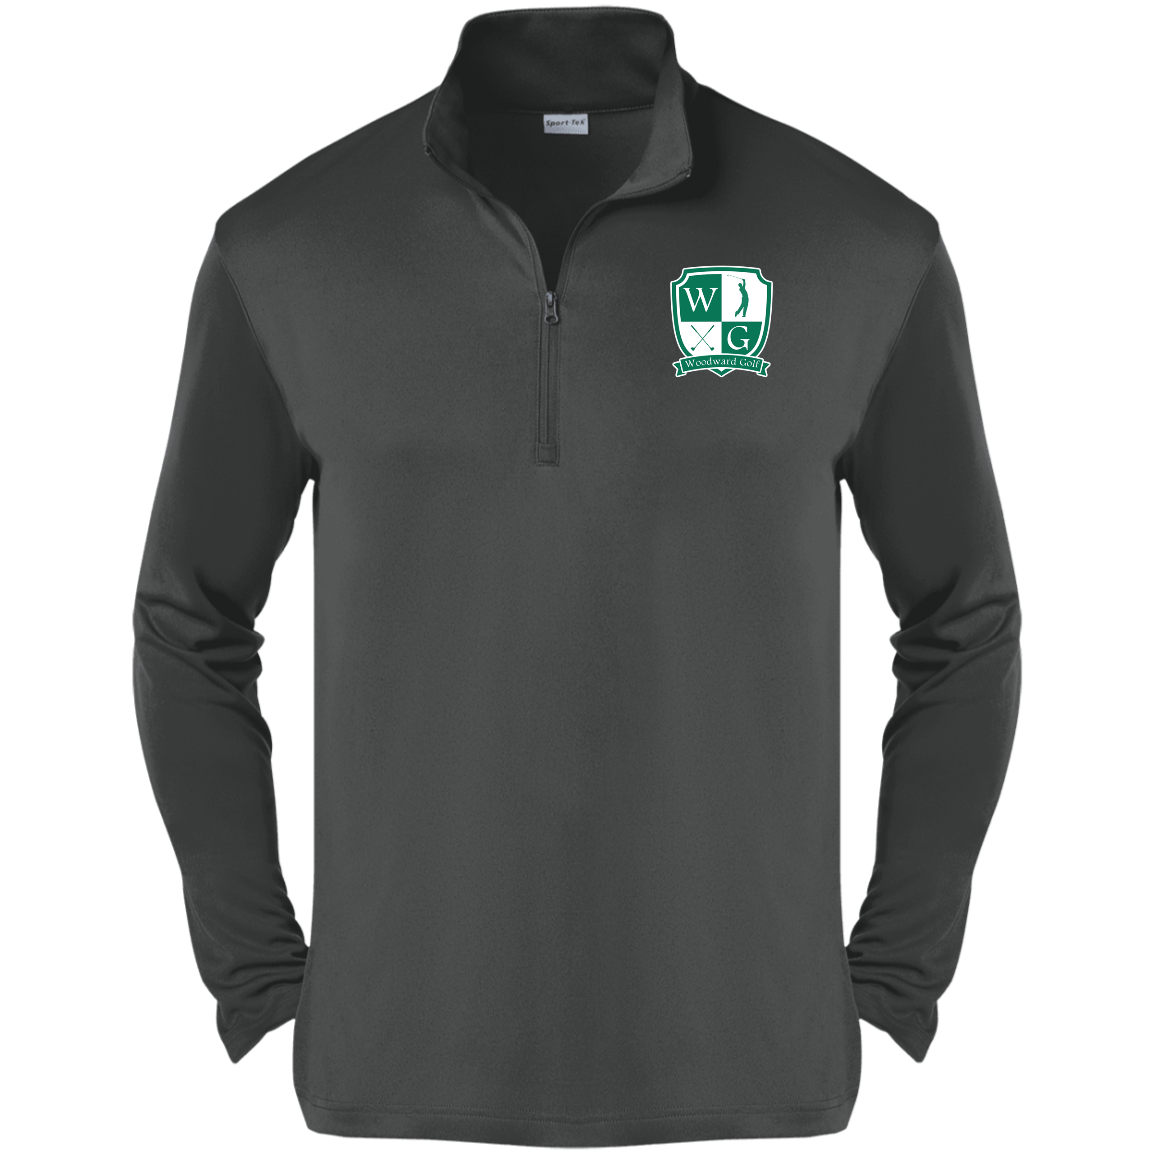 WSN GOLF CREST Competitor 1/4-Zip Pullover